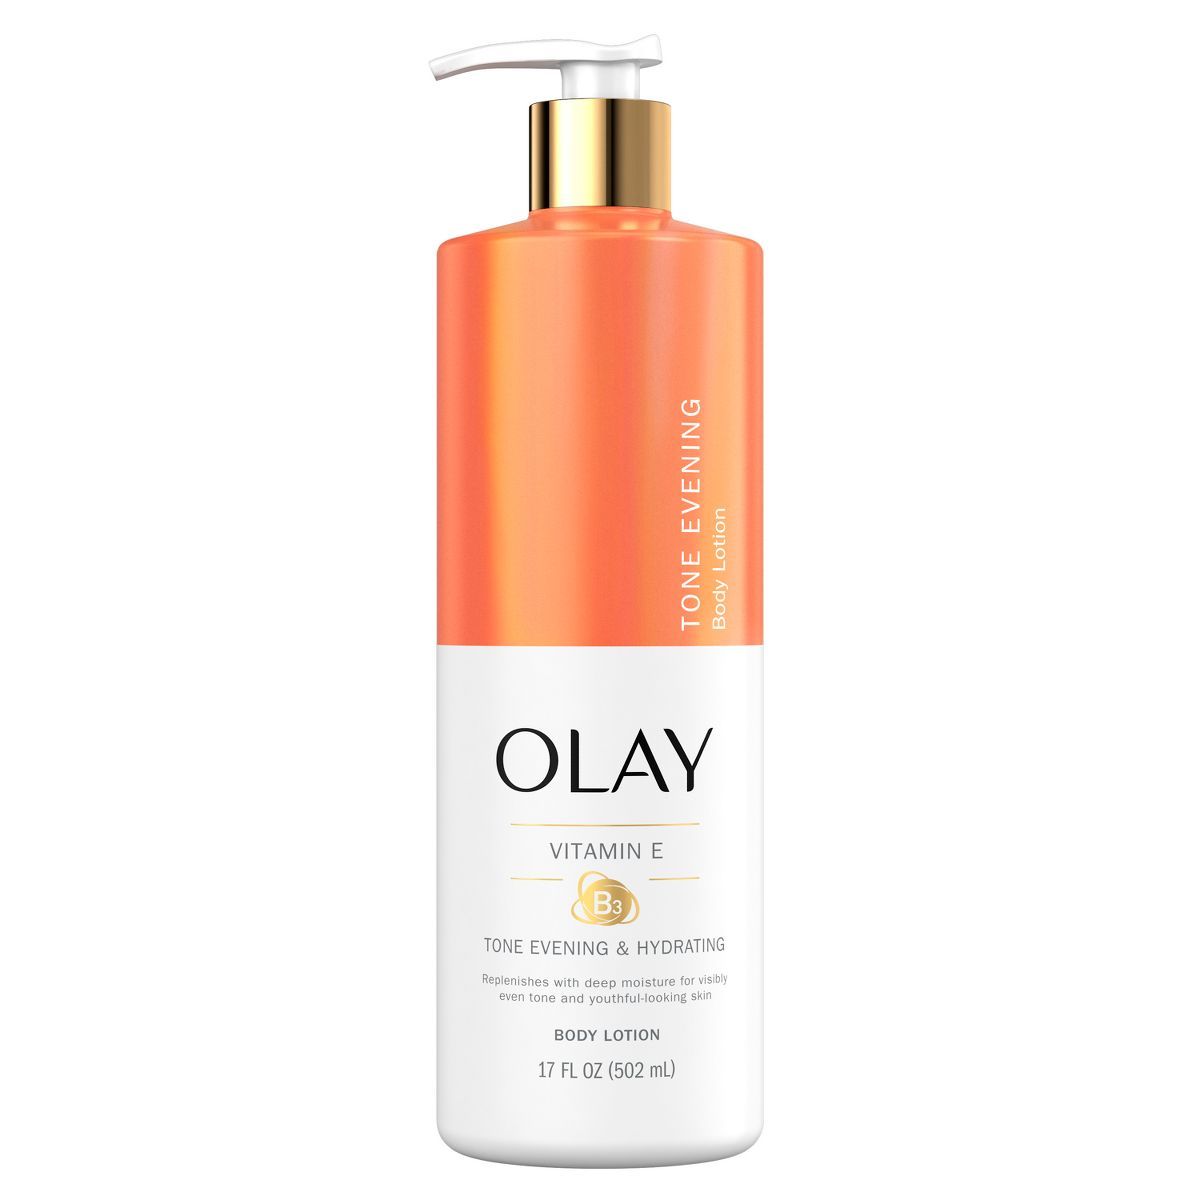 Olay Daily Tone Hydrating Body Lotion Scented - 17 fl oz | Target